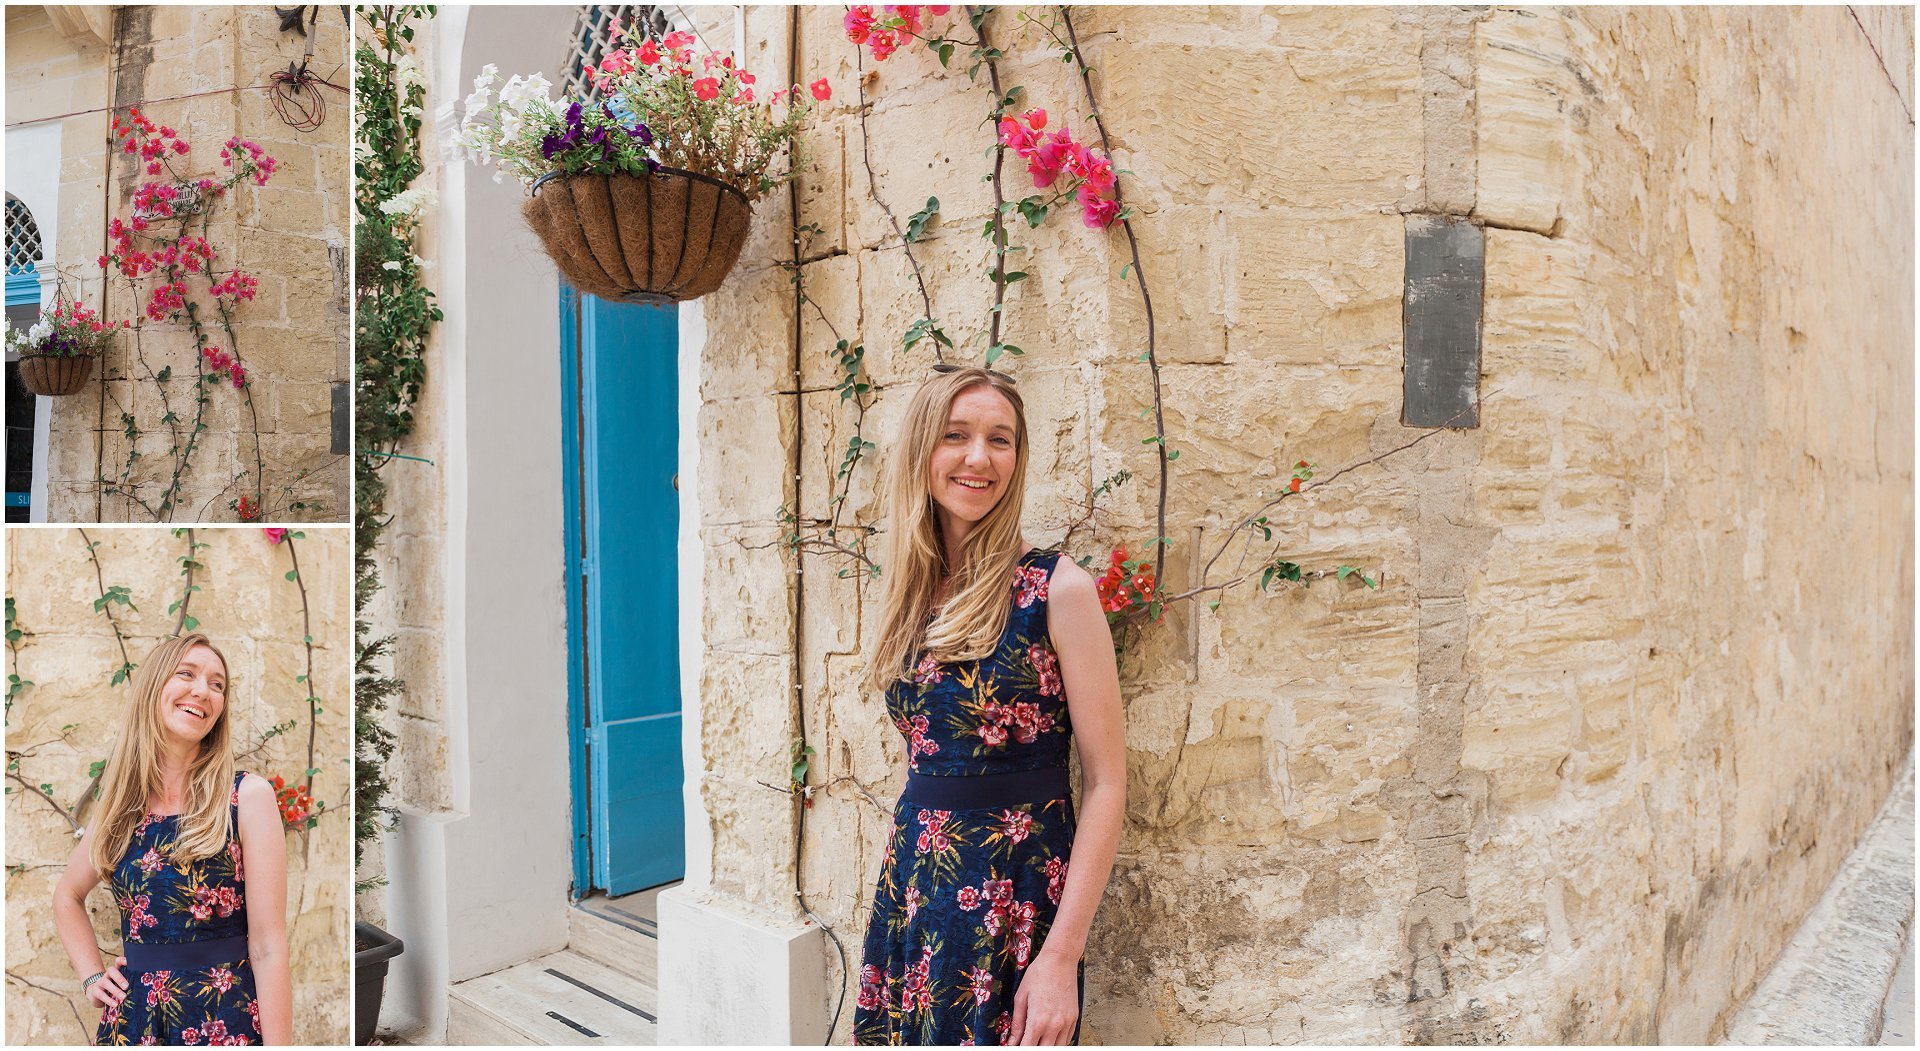 Mdina destination brand photography, Malta cobbled streets, Laura from Tell My Story, image by London brand photographer and destination brand photographer AKP Branding Stories